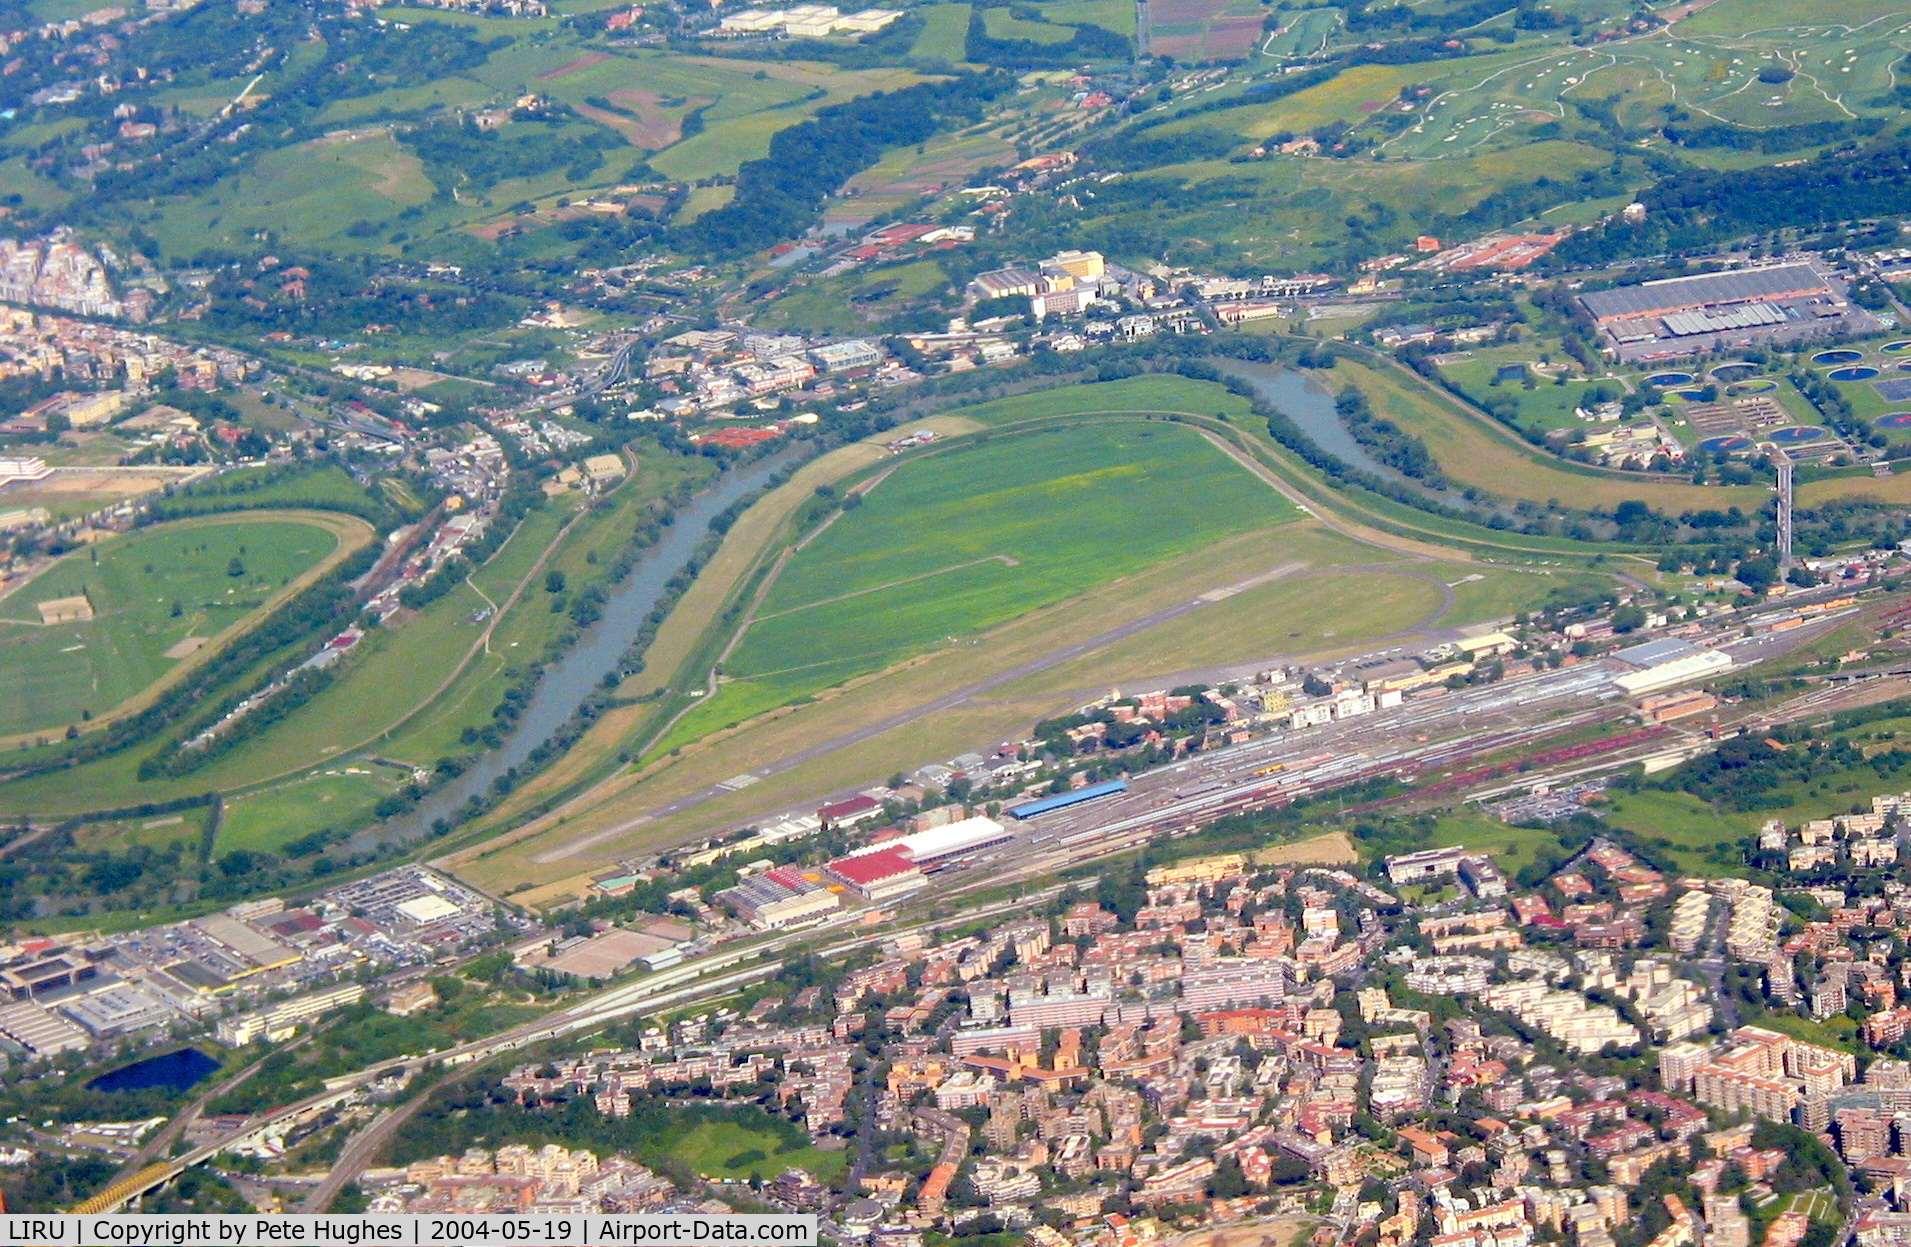 Rome Urbe Airport, Rome Italy (LIRU) - Rome - Urbe seen from a Ryanair Boeing 737